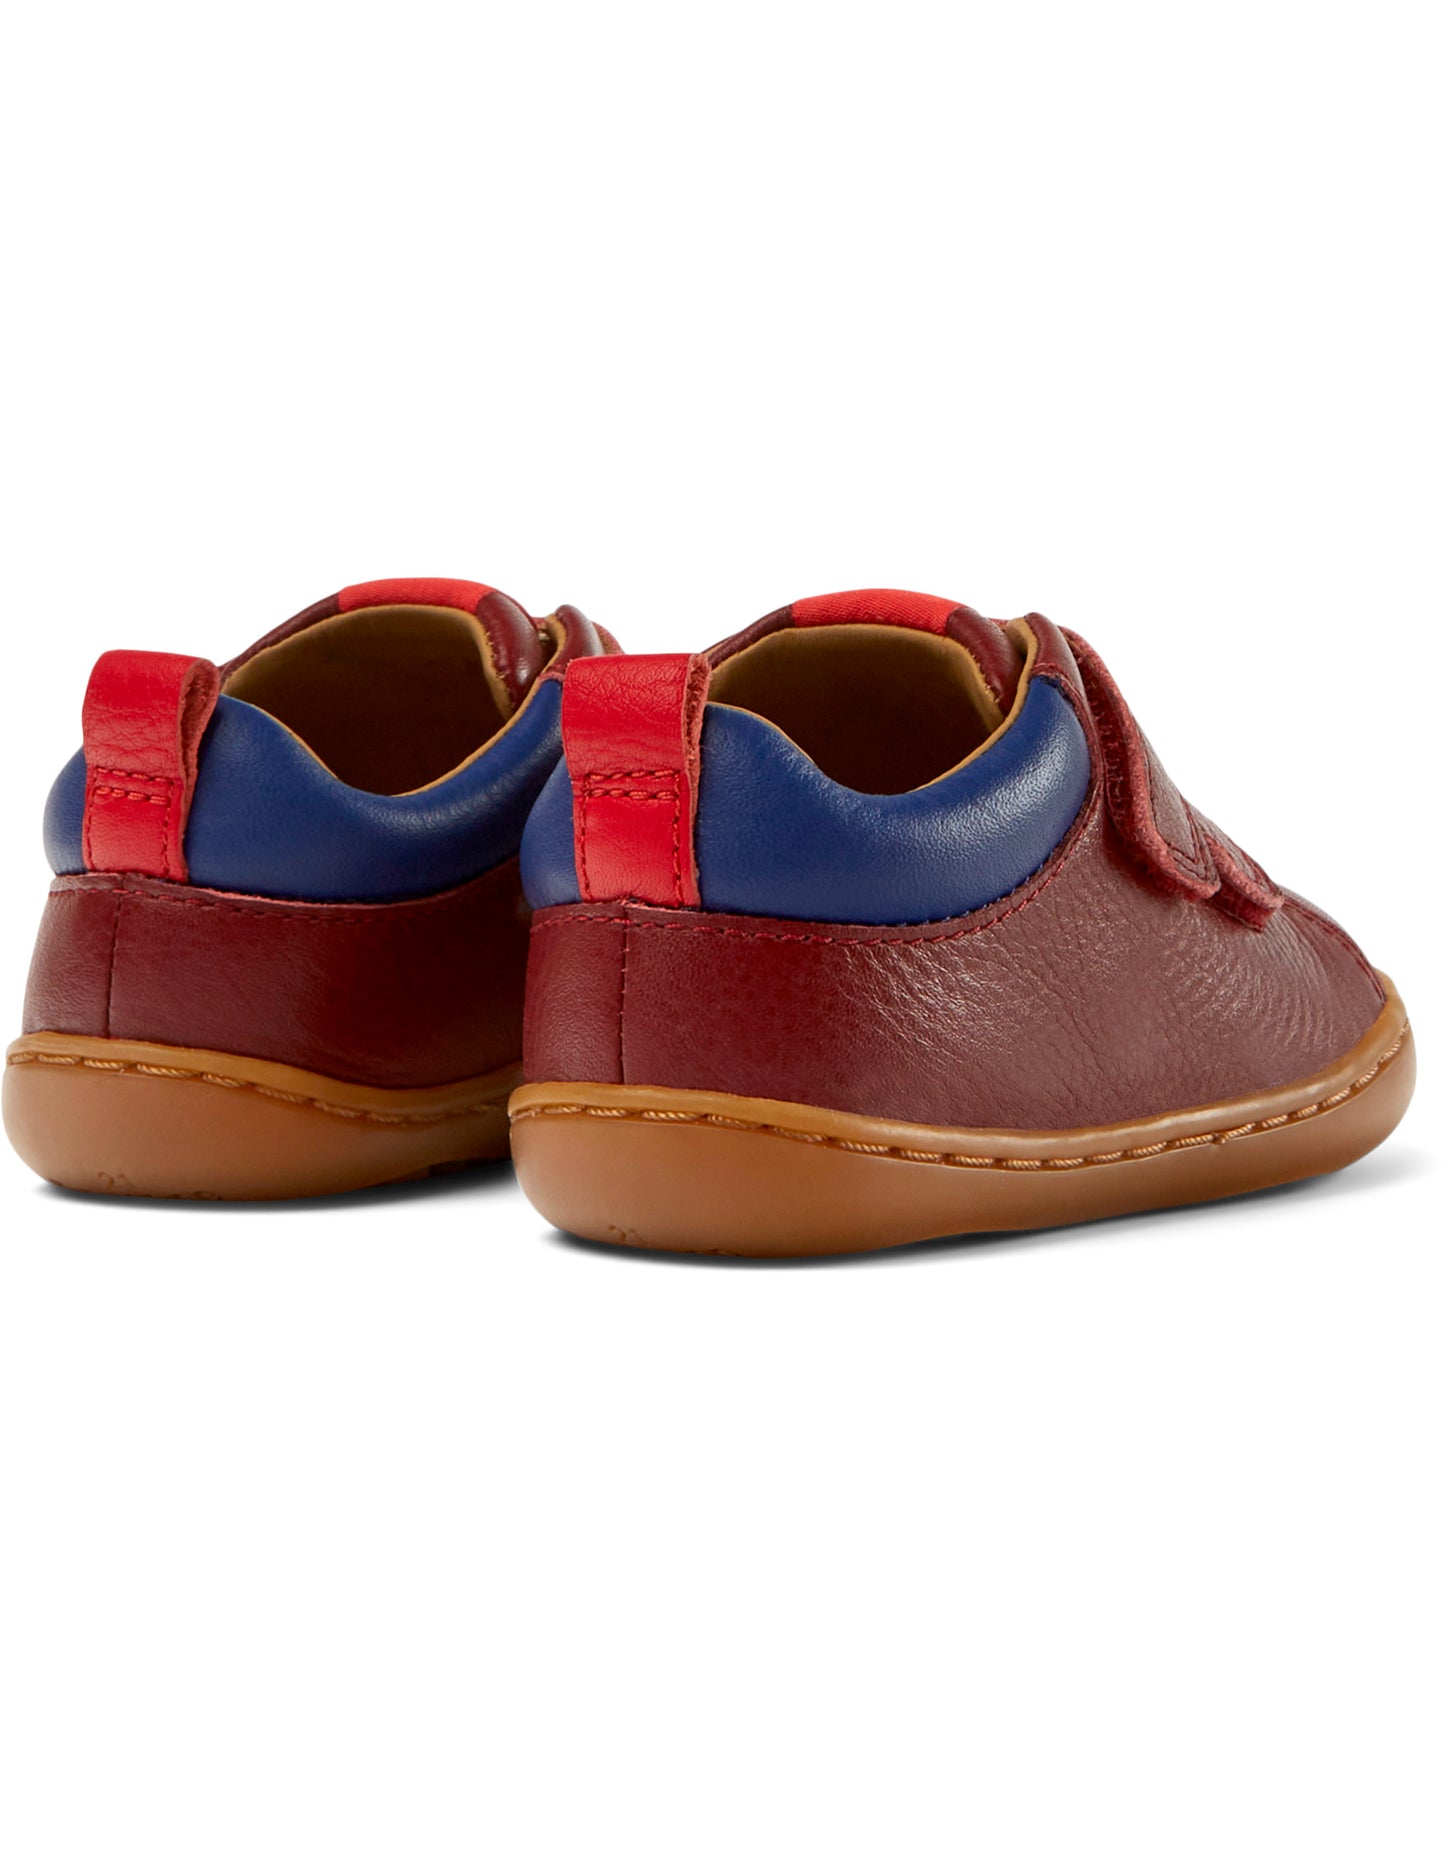 A boys casual shoe by Camper, style K800405-019, Peu Cami FW, in Burgundy Leather, with velcro fastening. Back pair view.